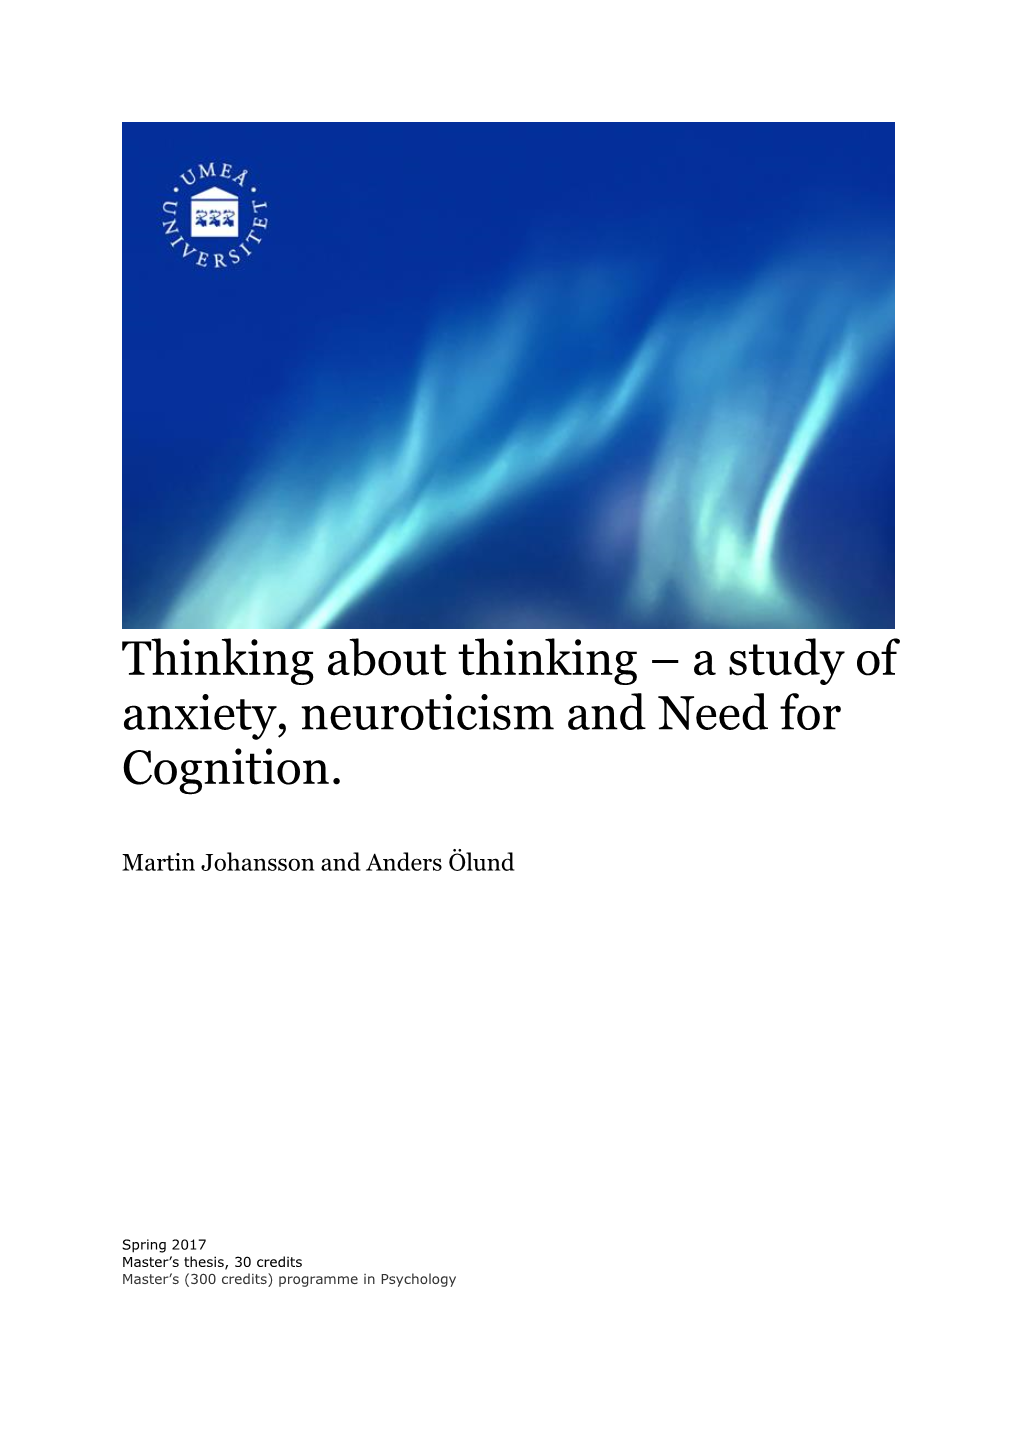 A Study of Anxiety, Neuroticism and Need for Cognition